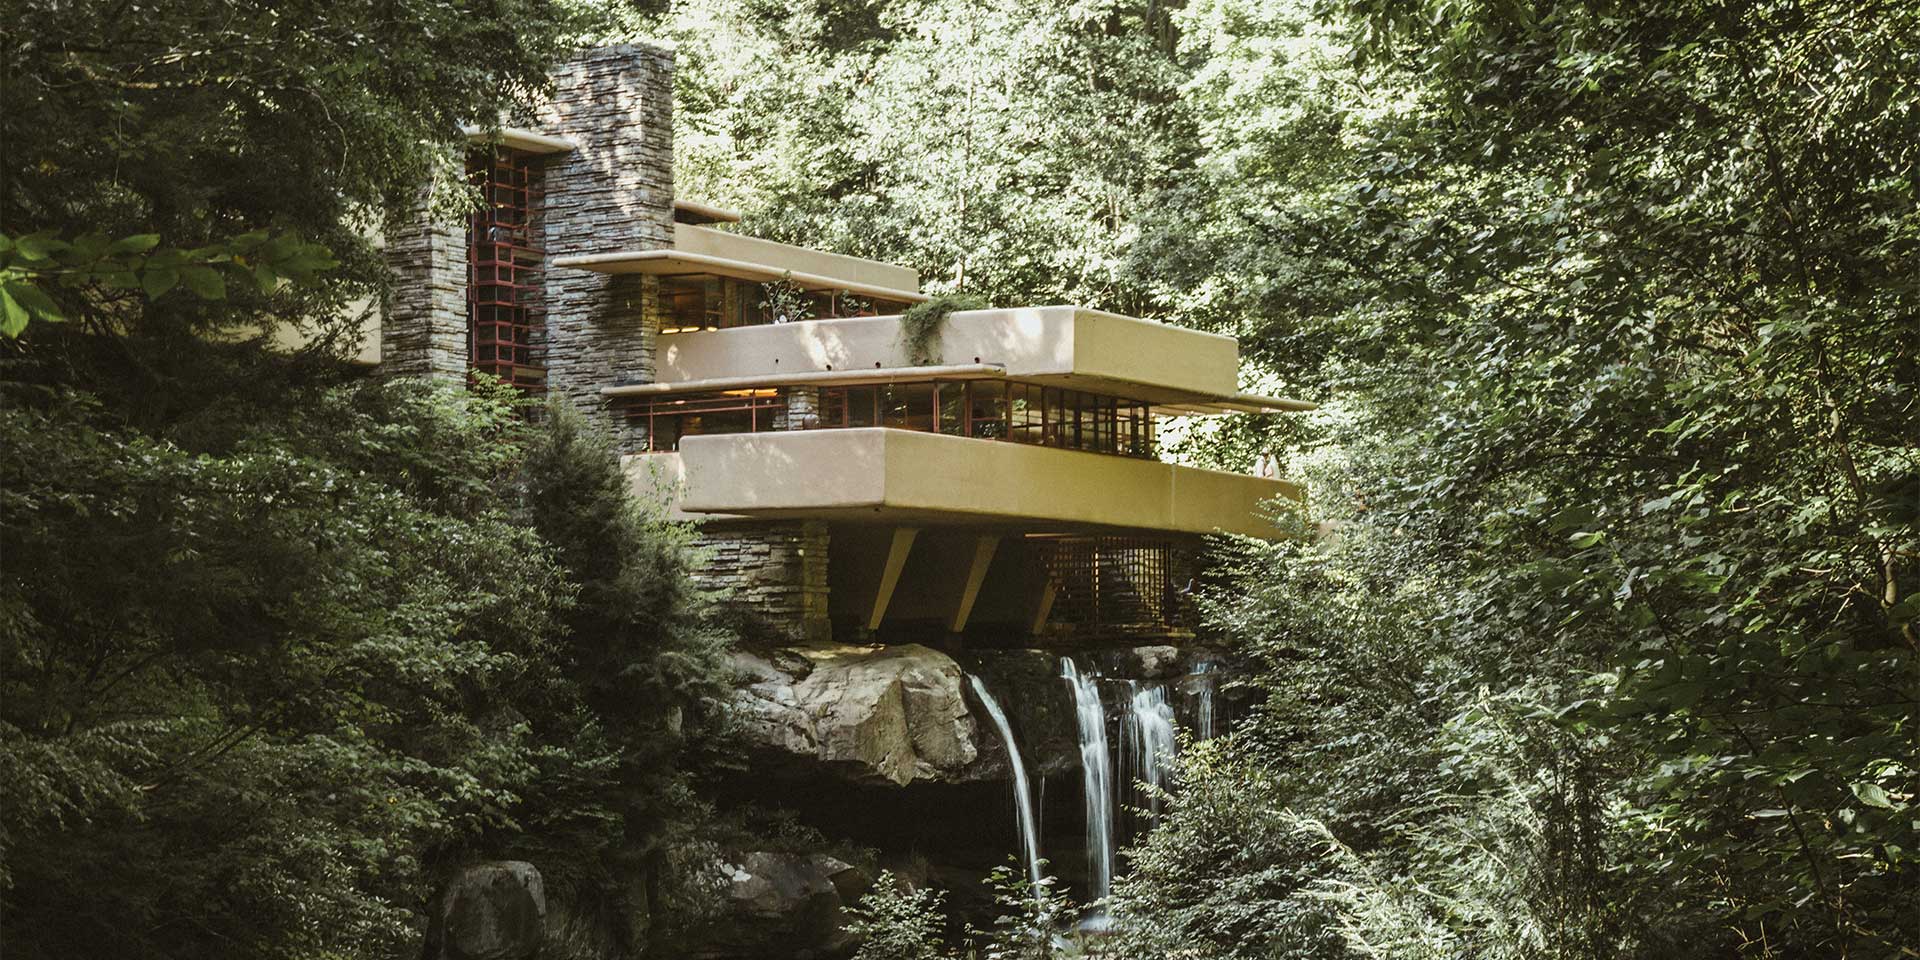 beautiful place in the woods with extended balconies and a waterfall beneath